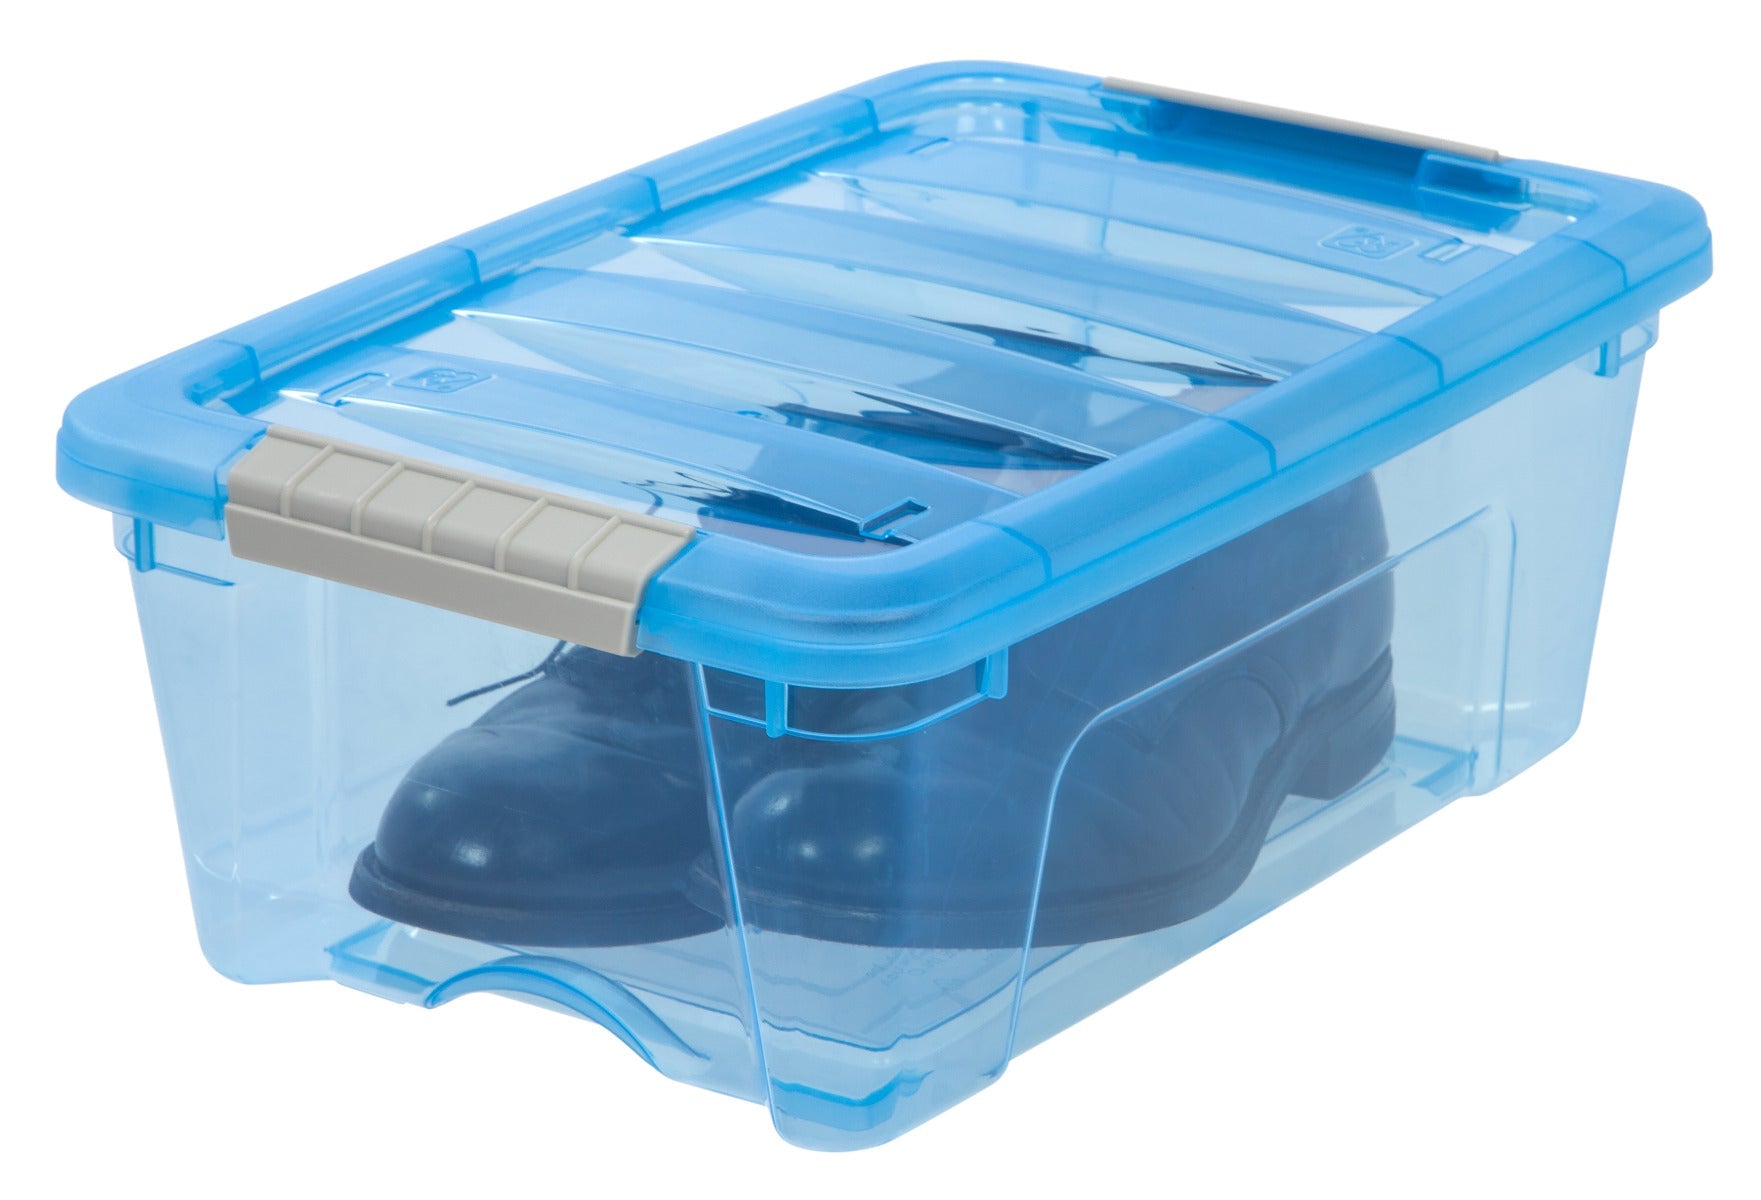 Iris USA Stack and Pull Storage Box, Clear - 6 count, 12.9 qt each